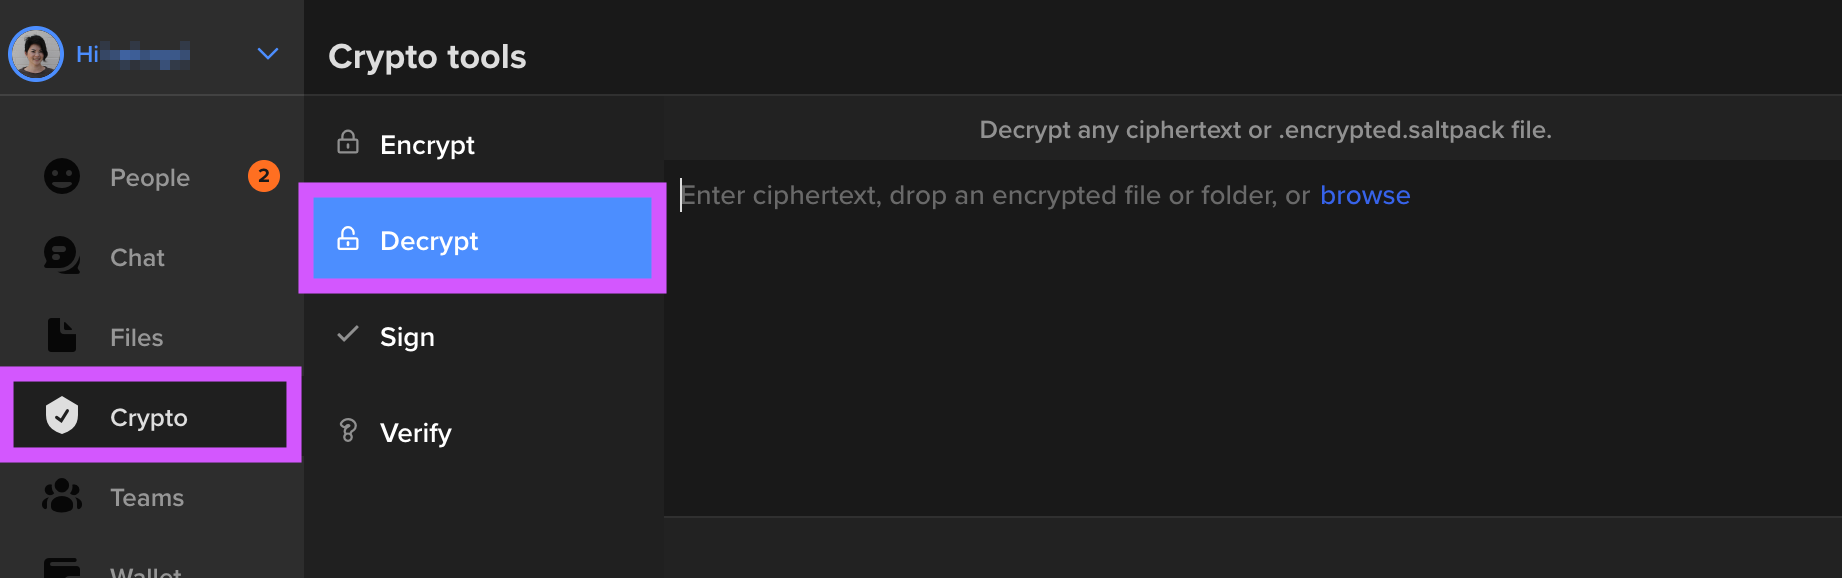 decrypt-cipher-03-navigate-and-select-decrypt-ed.png